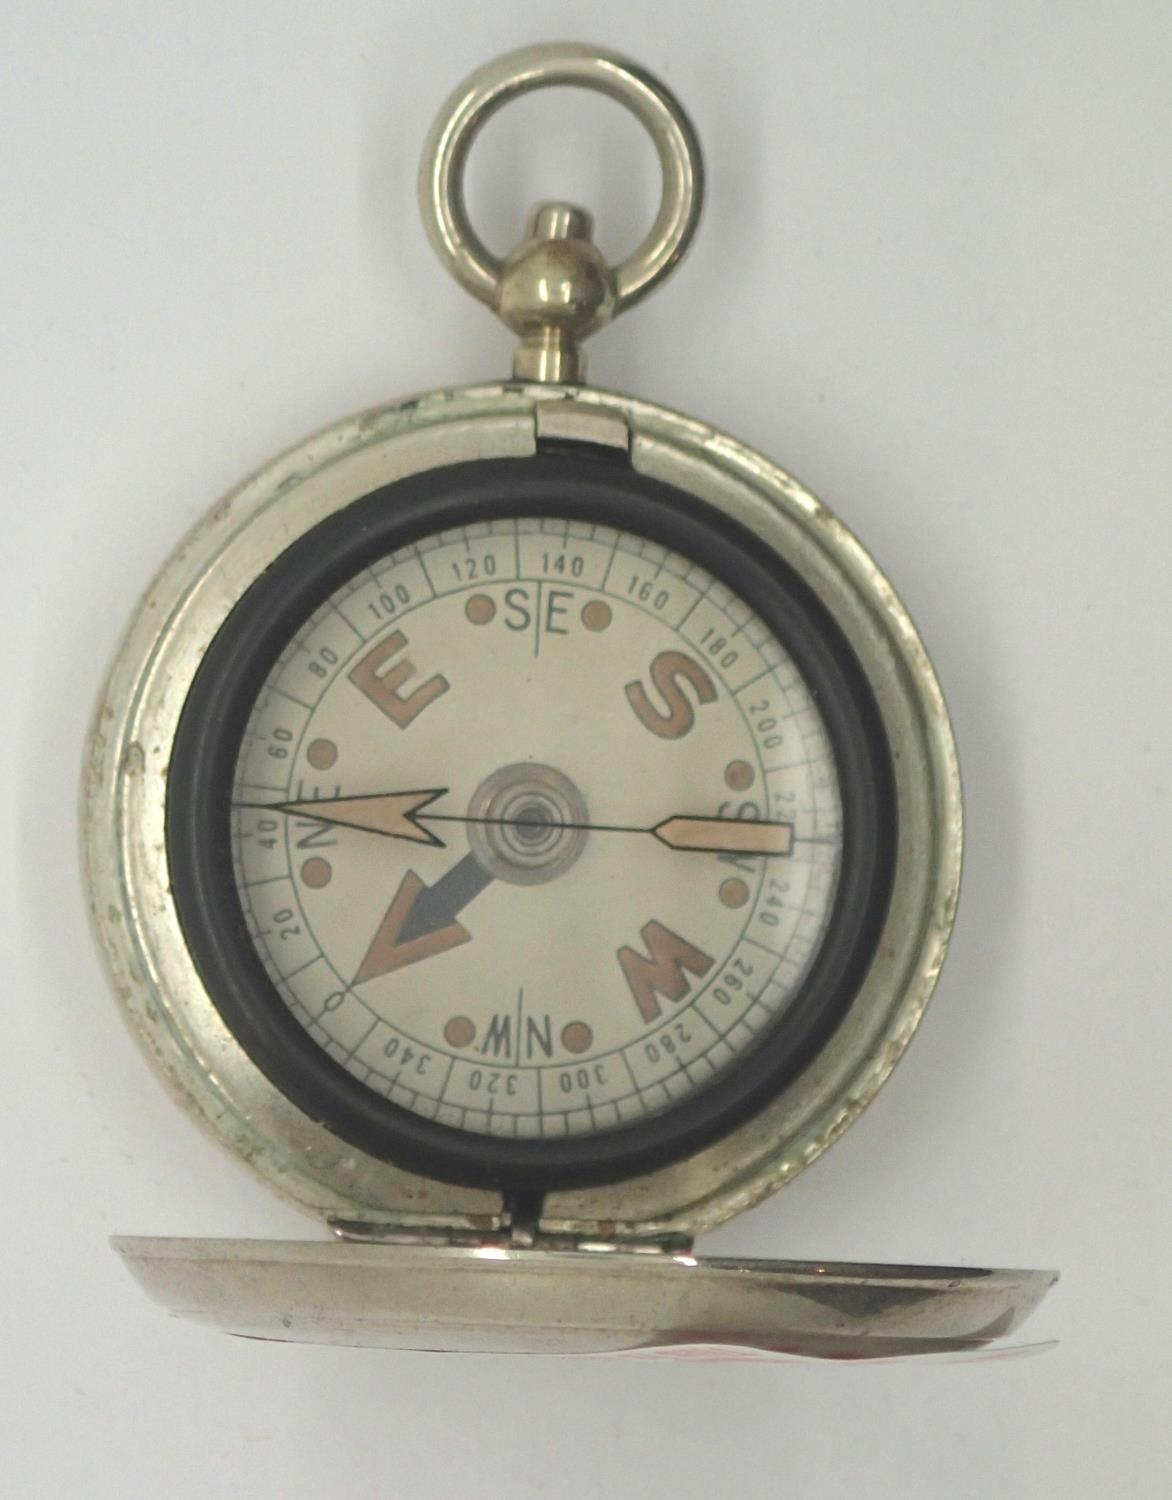 White metal vintage pocket compass. Working at lotting up. P&P group 1 (16 for the first item and £